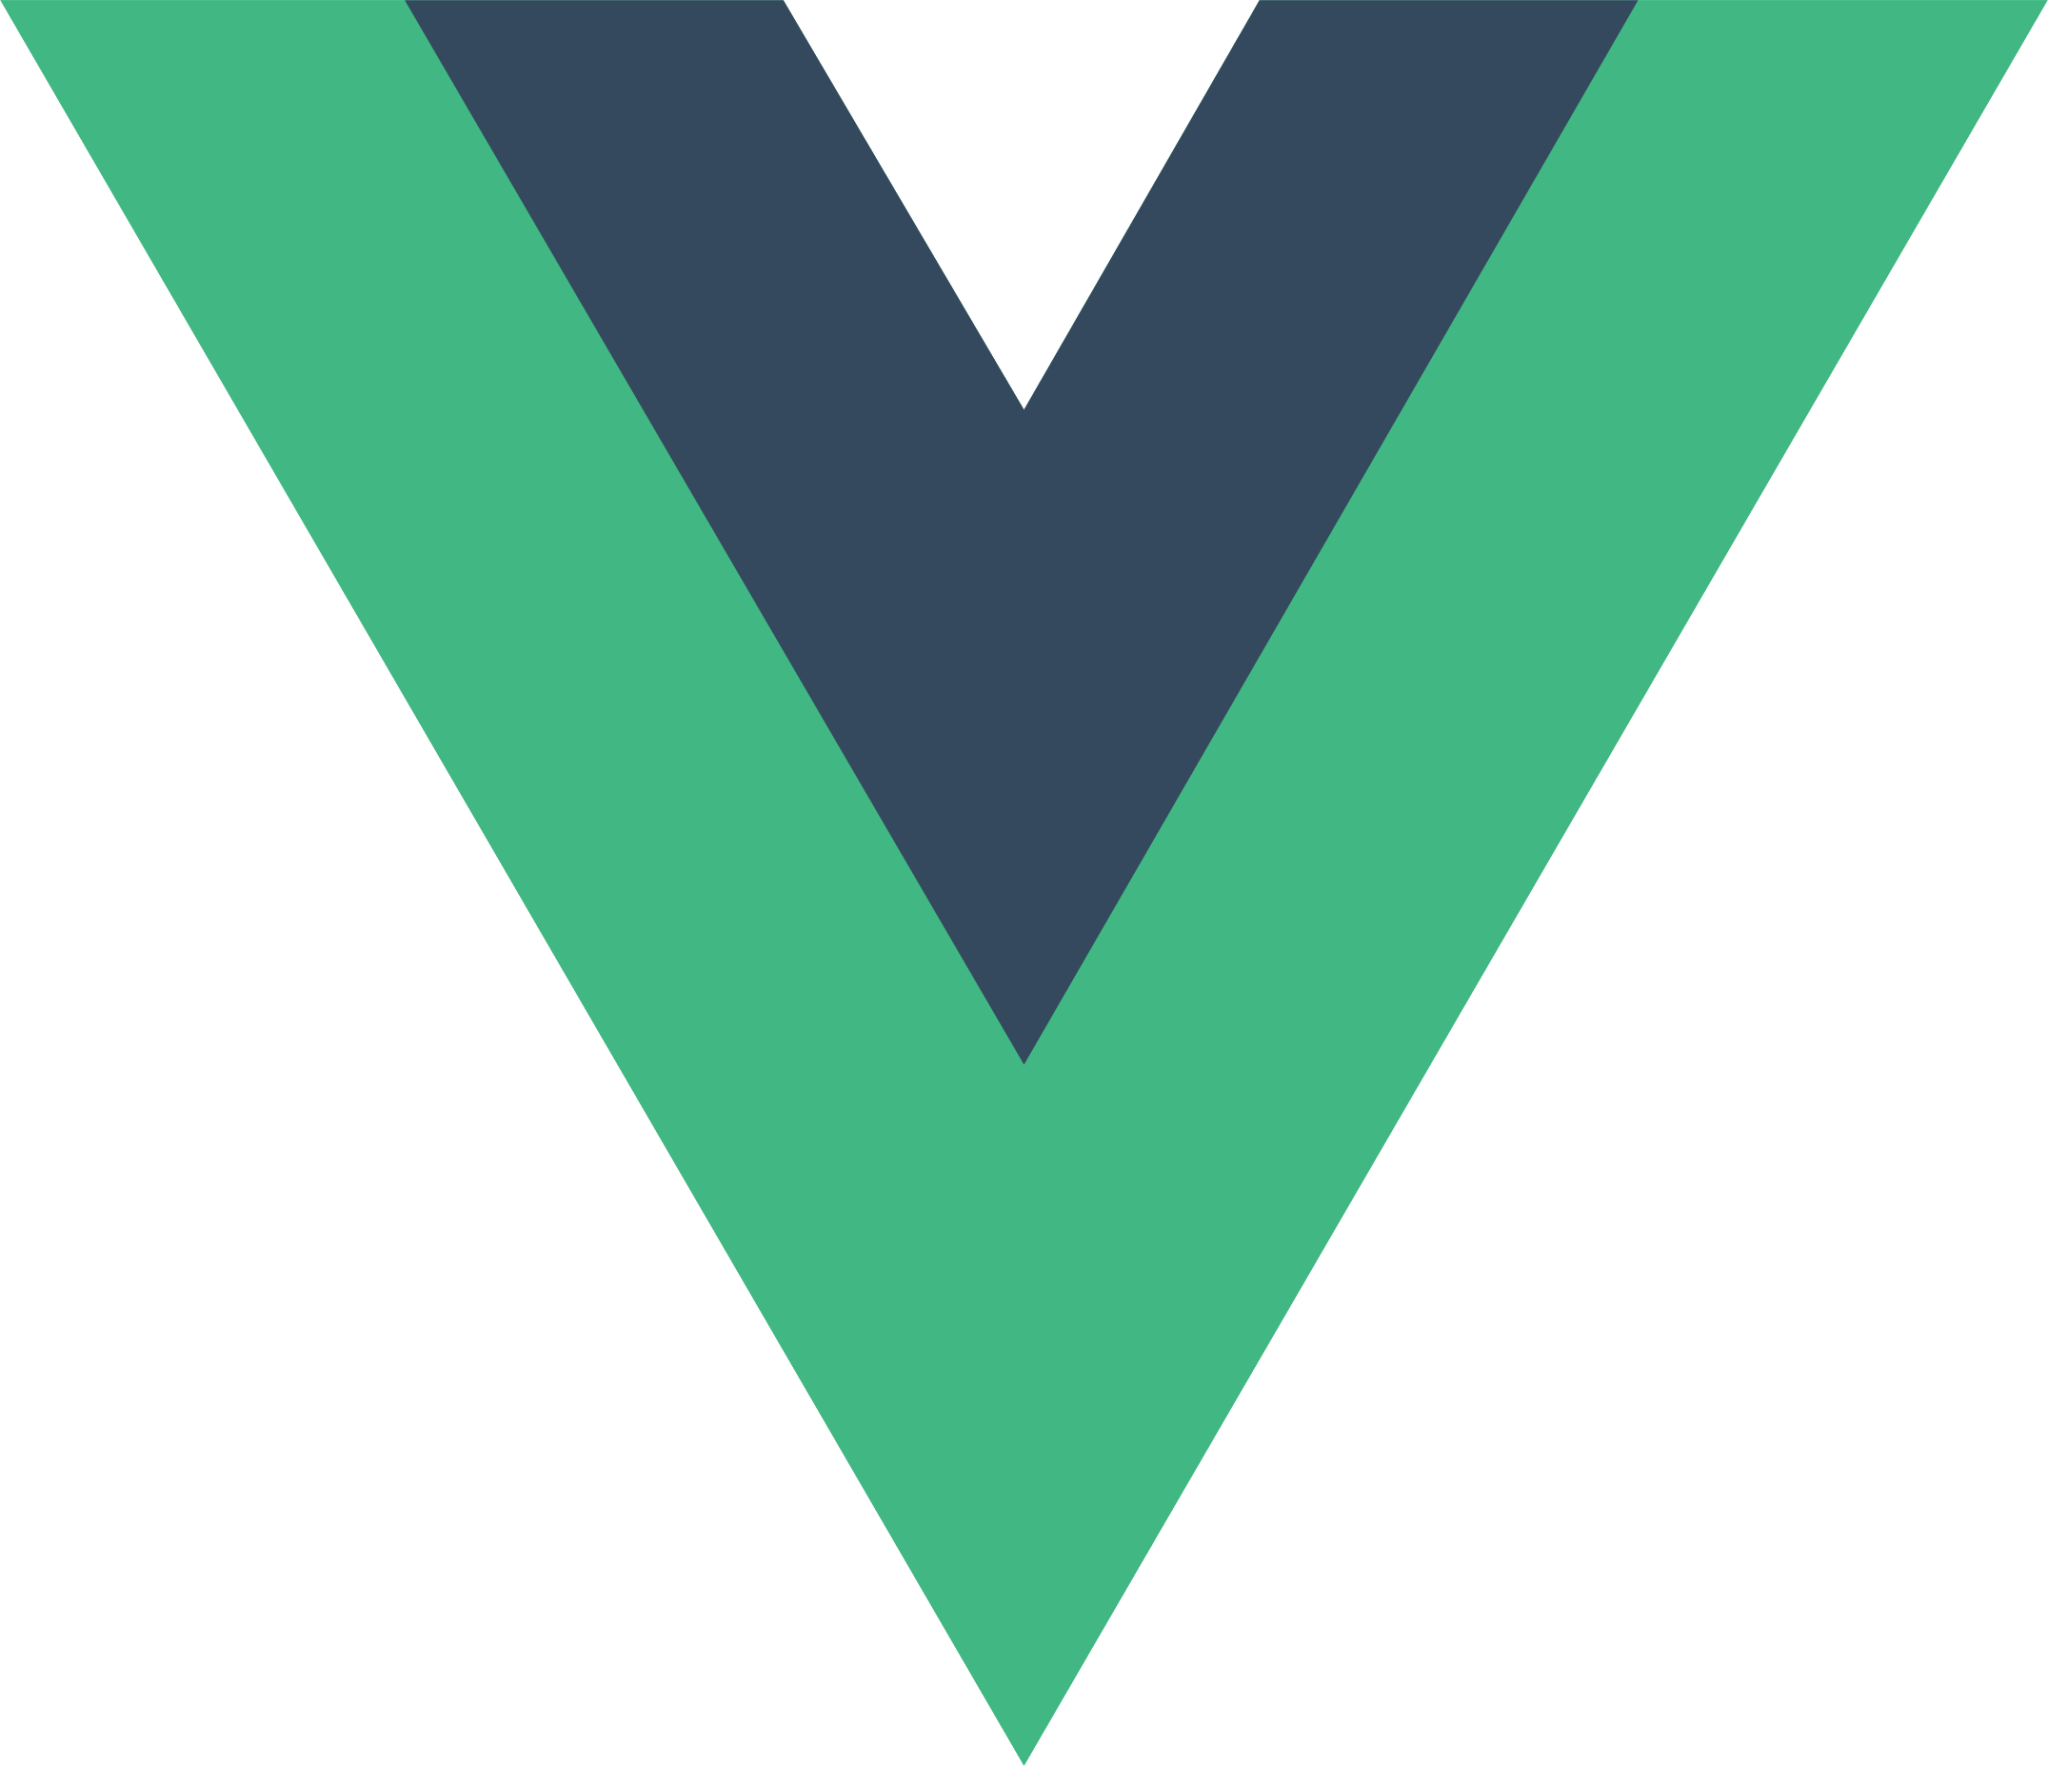 file type vue icon